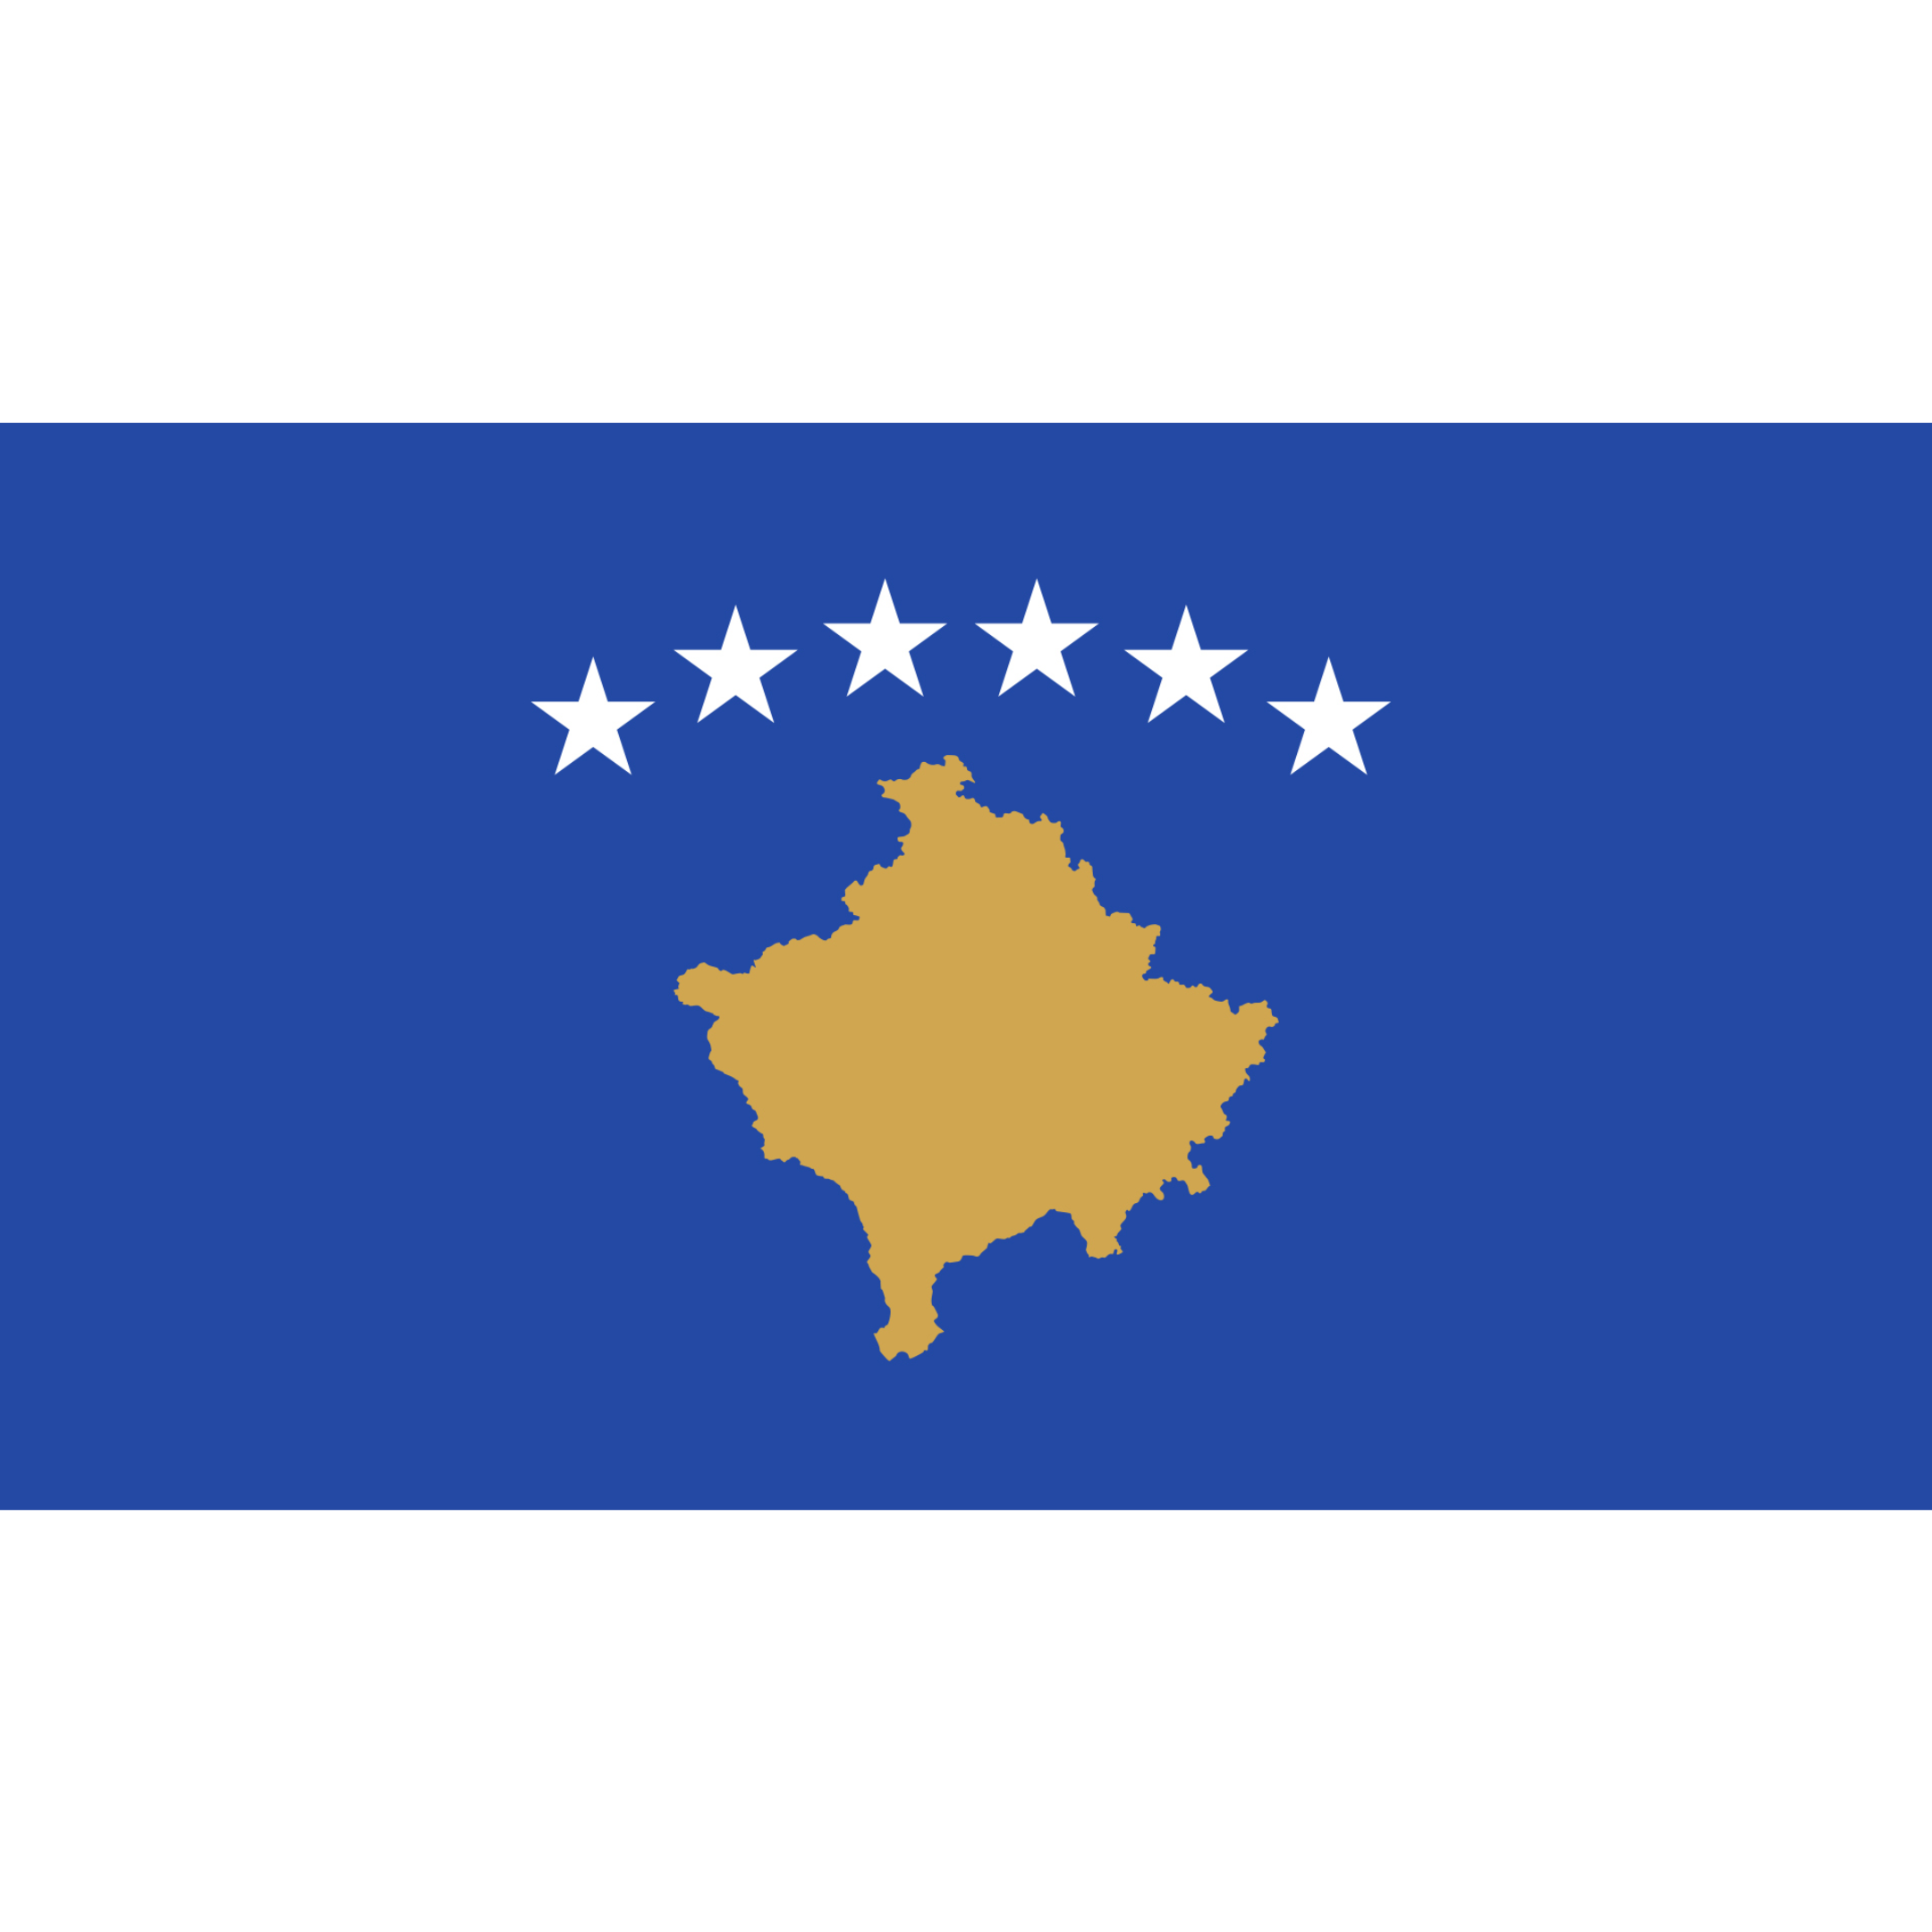 The flag of Kosovo has a blue background and six white stars in an arc above a golden map of Kosovo.